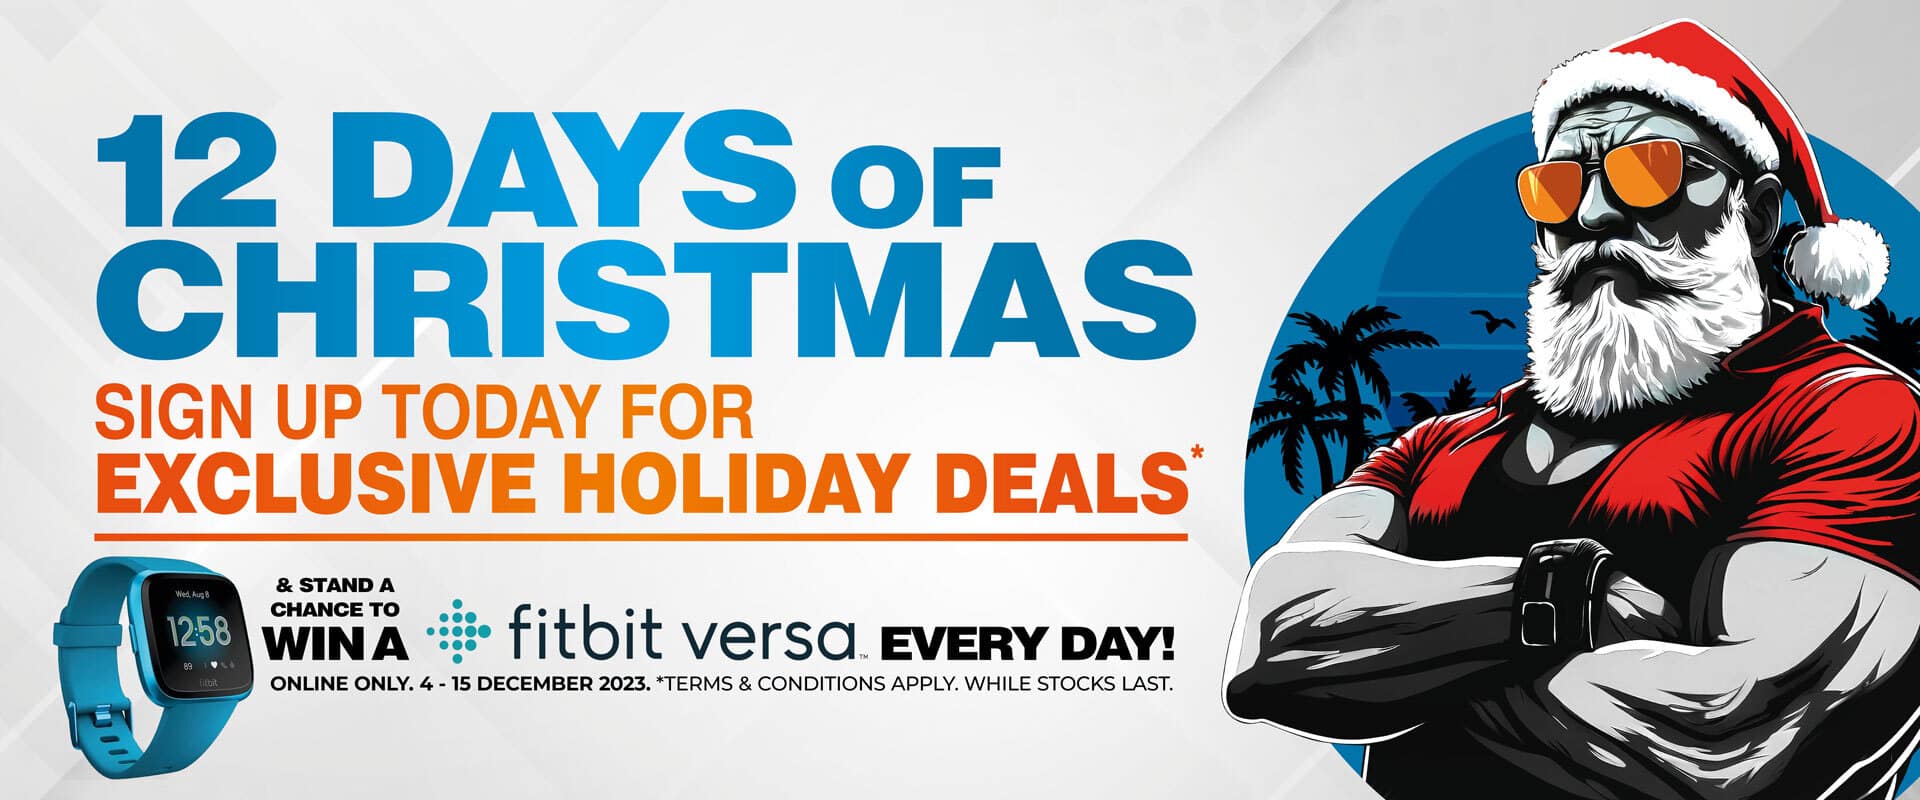 12 Days of Christmas - Sign Up For Exclusive Deals